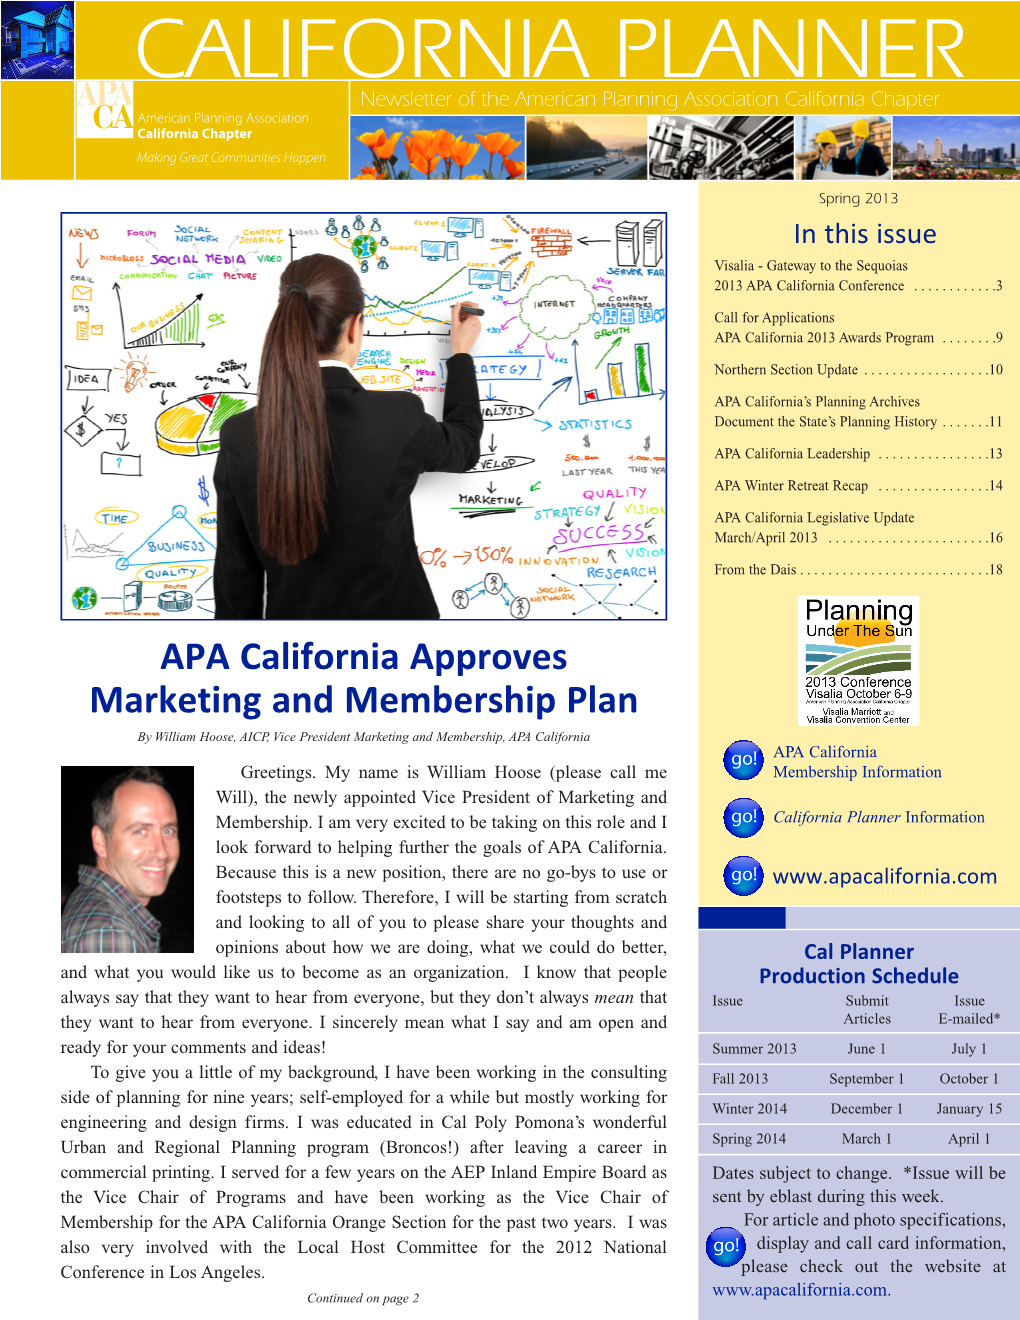 Spring 2013 in This Issue Visalia - Gateway to the Sequoias 2013 APA California Conference